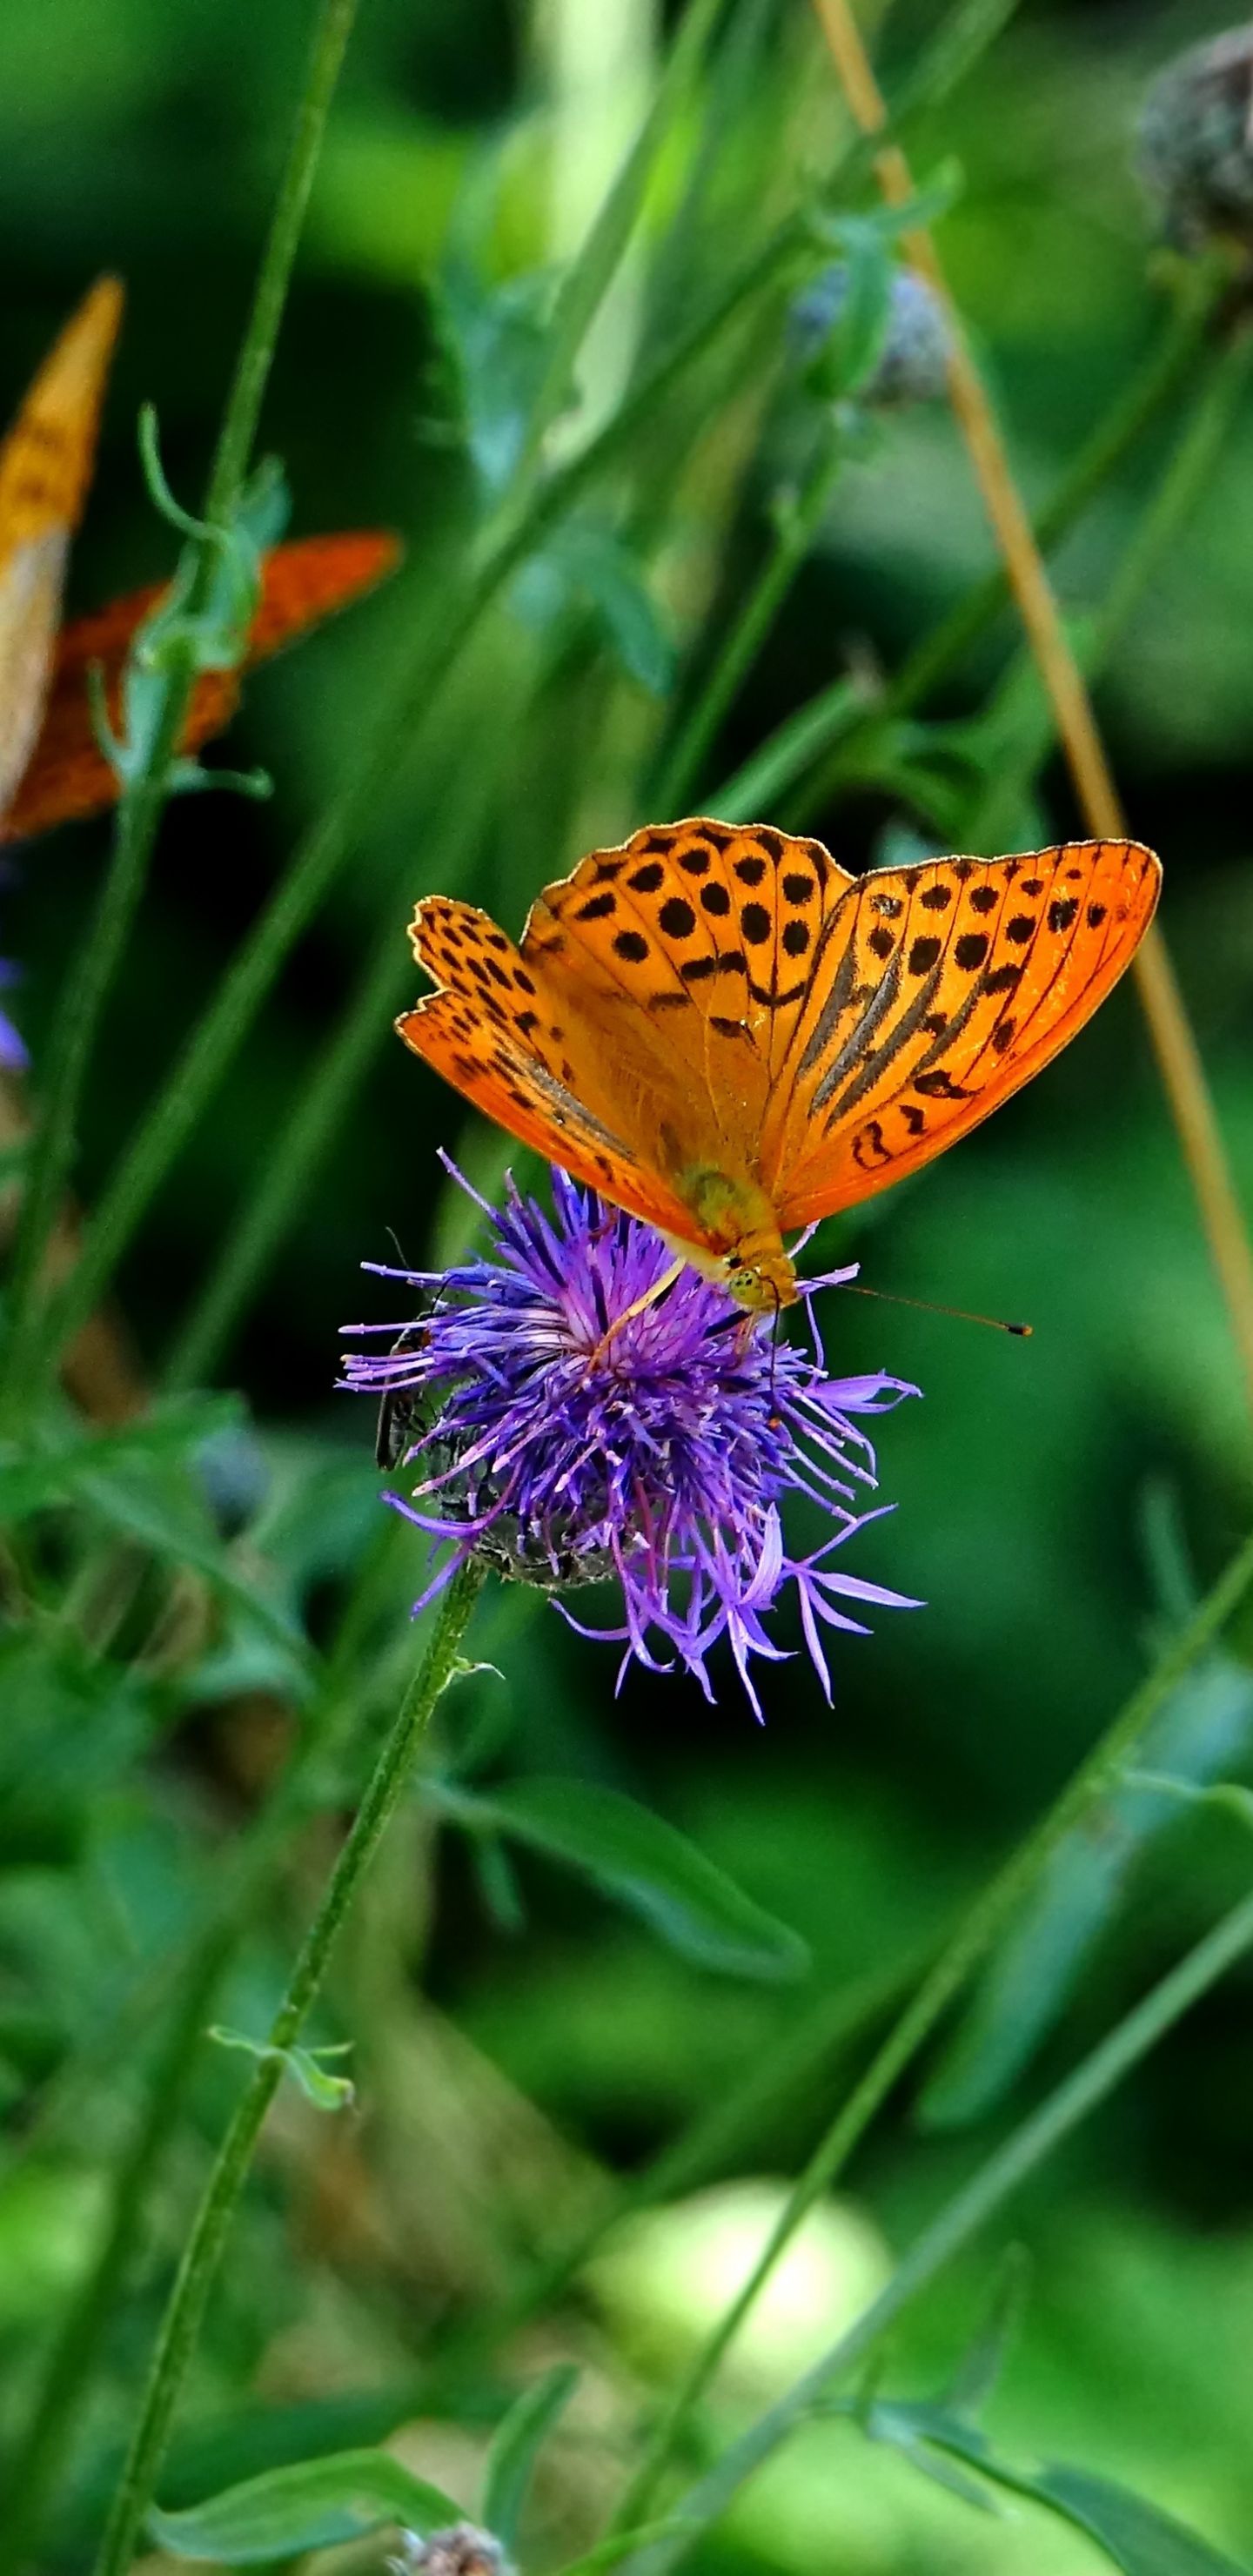 Download 1440x2960 wallpaper orange butterfly, insects, meadow, spring, samsung galaxy s samsung galaxy s8 plus, 1440x2960 HD image, background, 1948